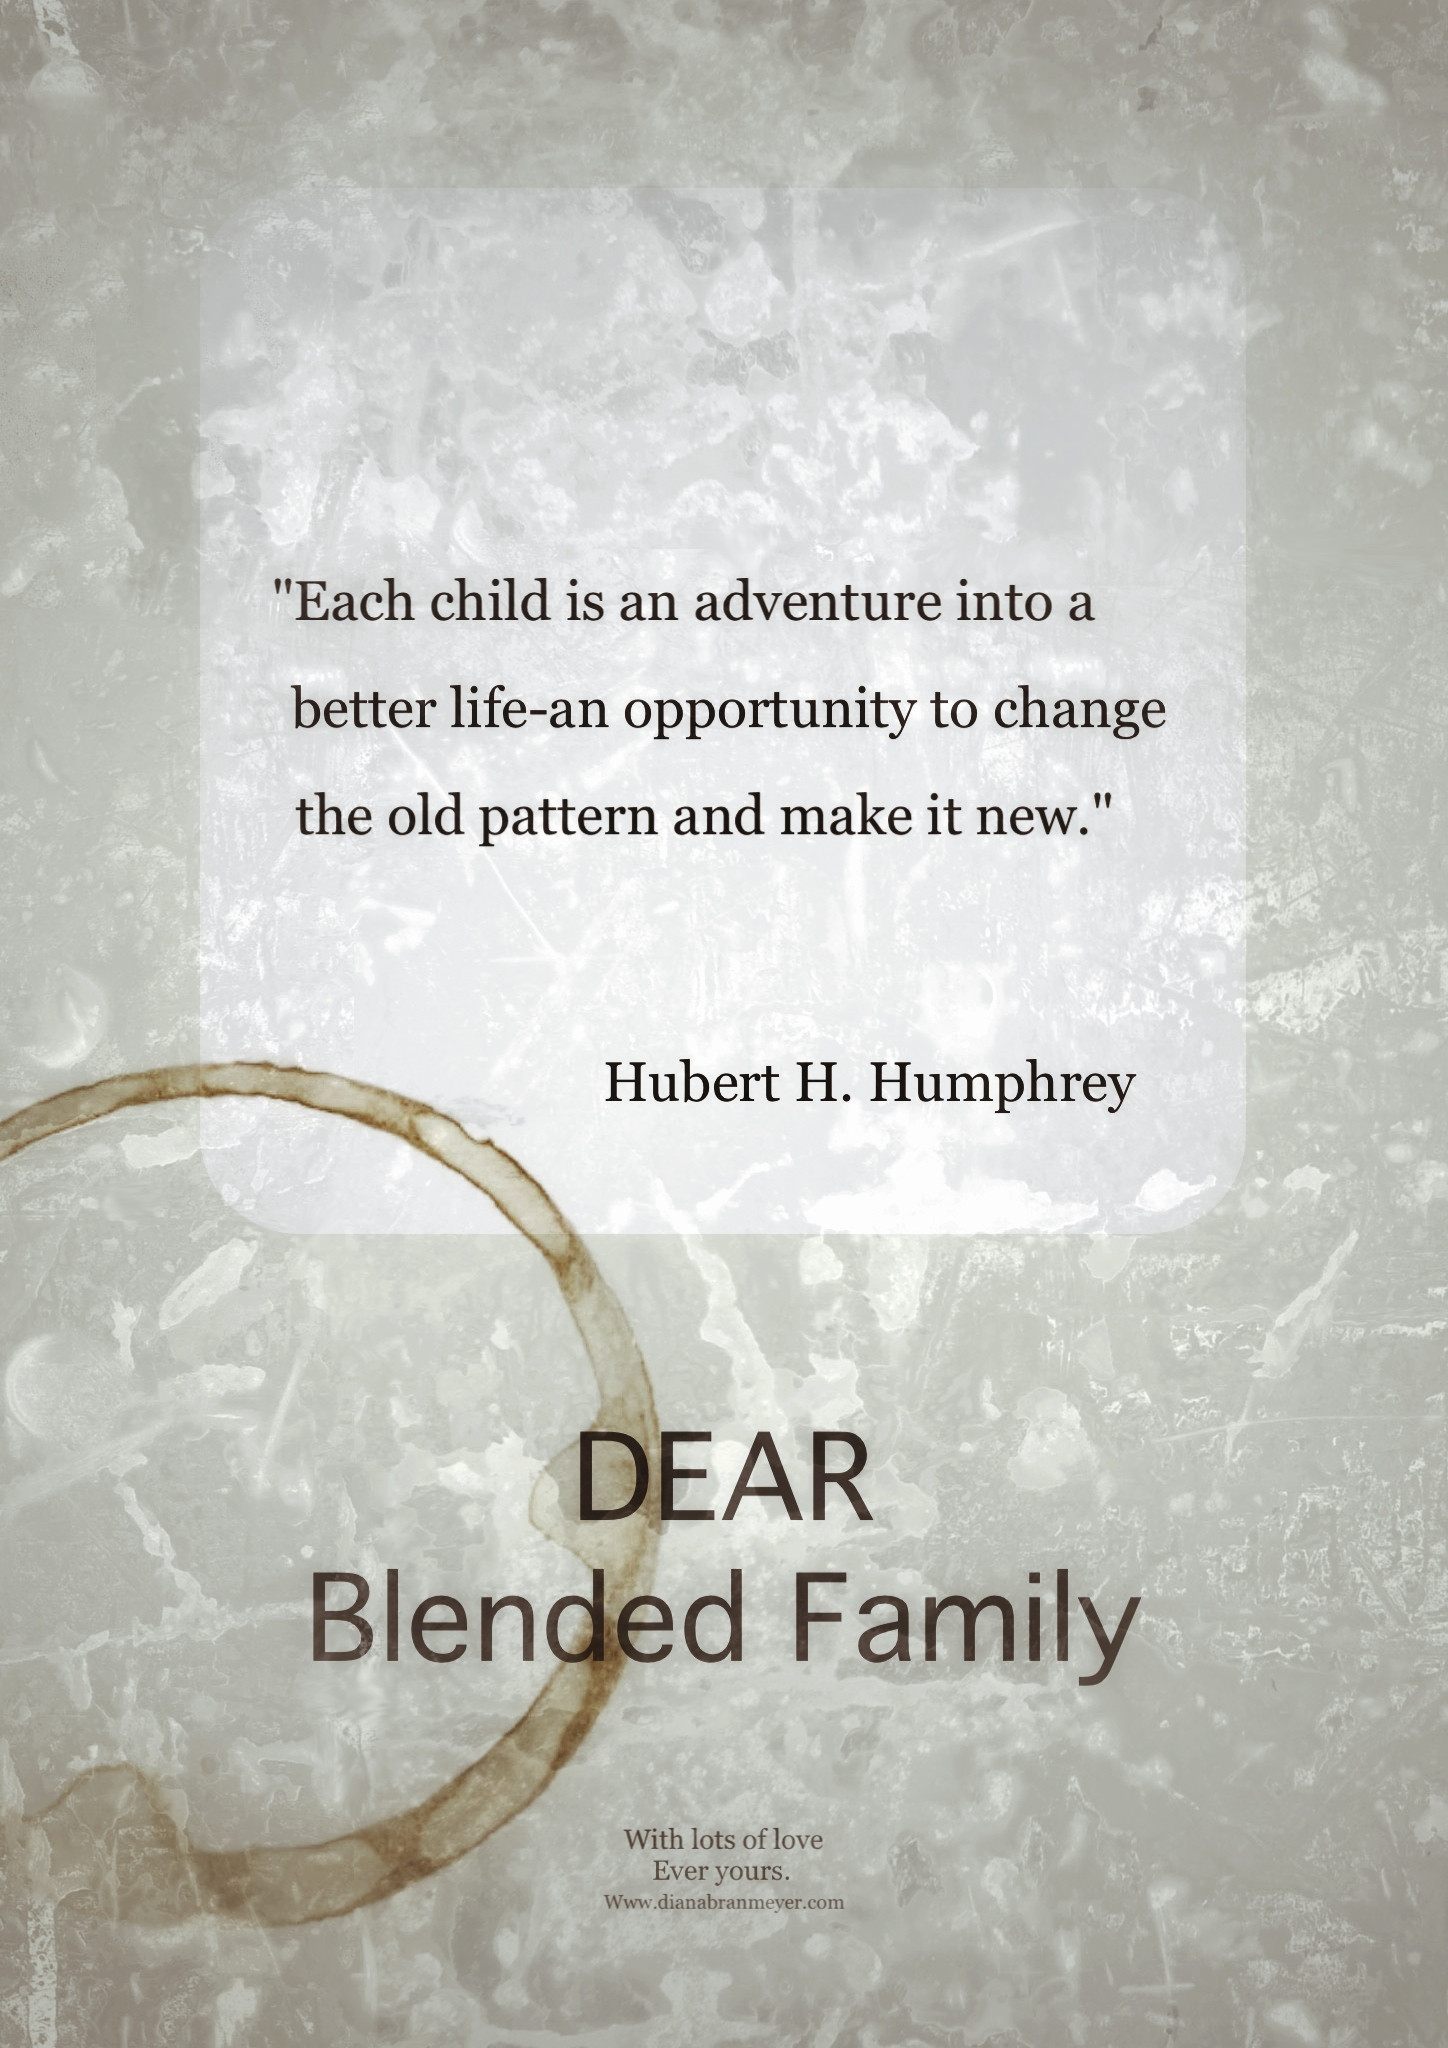 Blended Family Wedding Quotes
 Inspirational Quotes For Blended Families QuotesGram